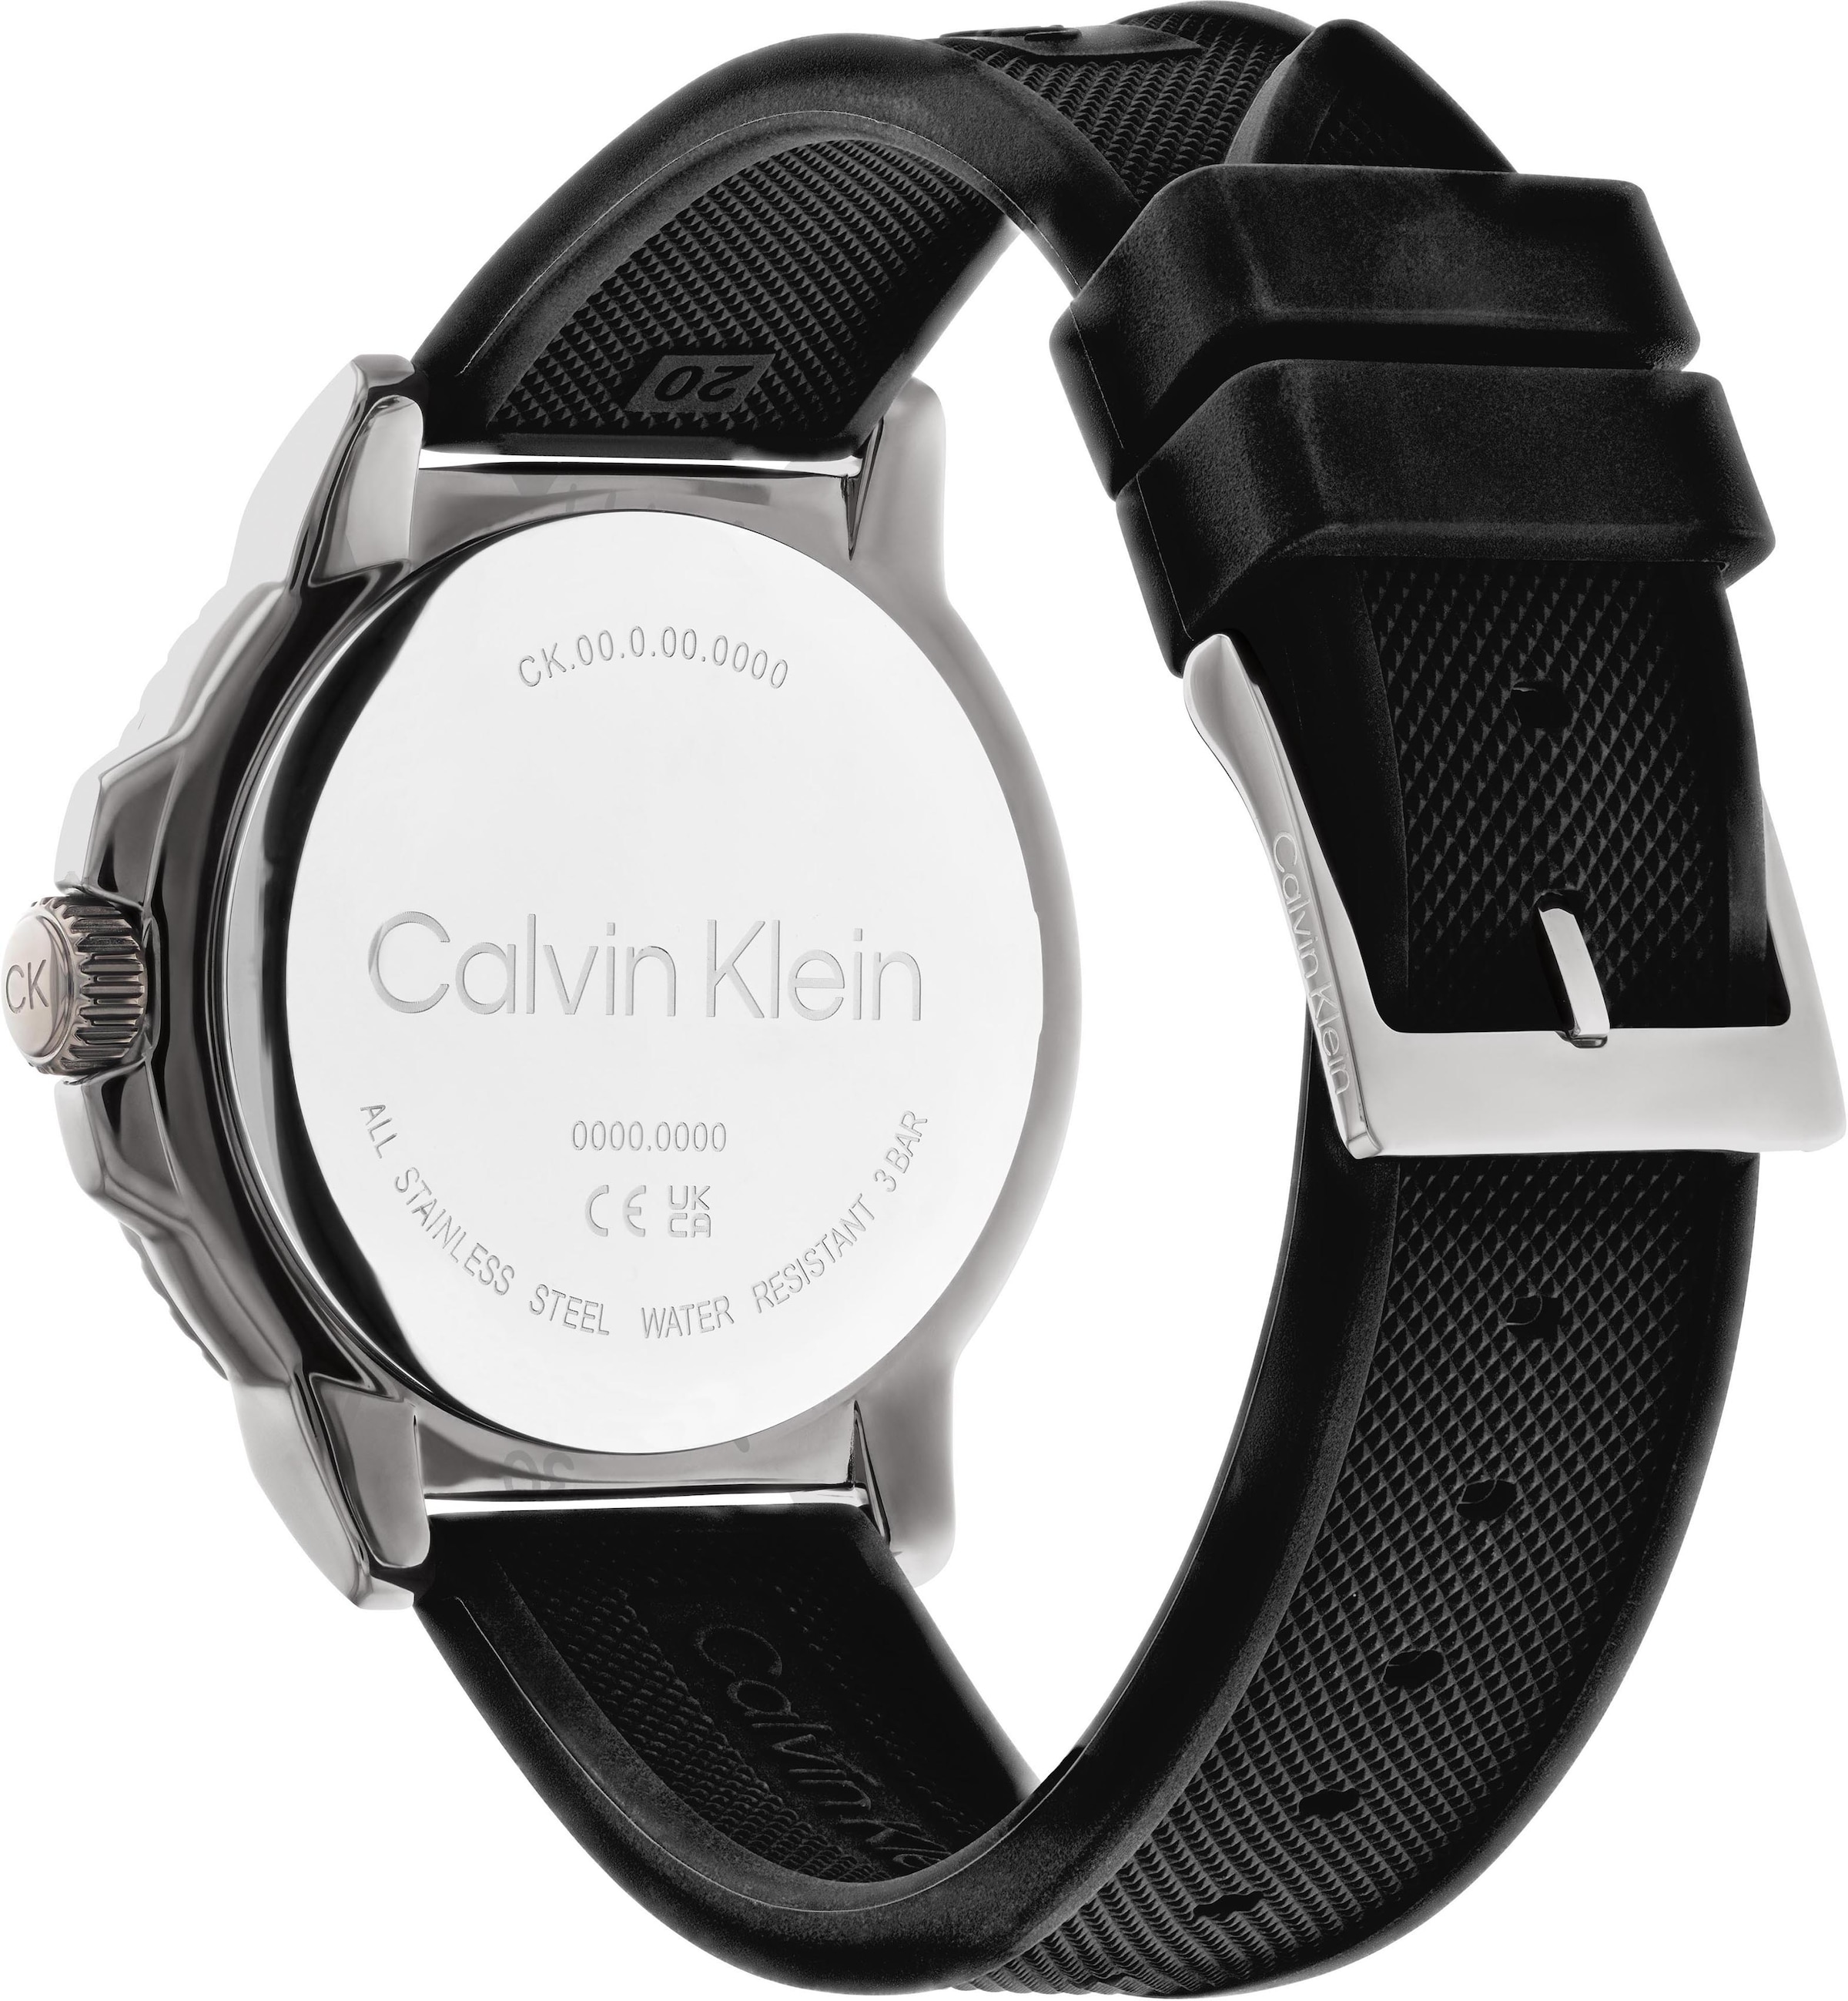  Calvin Klein Women's Quartz 25200281 Two Tone Stainless Steel  and Bangle Bracelet Watch, Color: Rose Gold : Clothing, Shoes & Jewelry